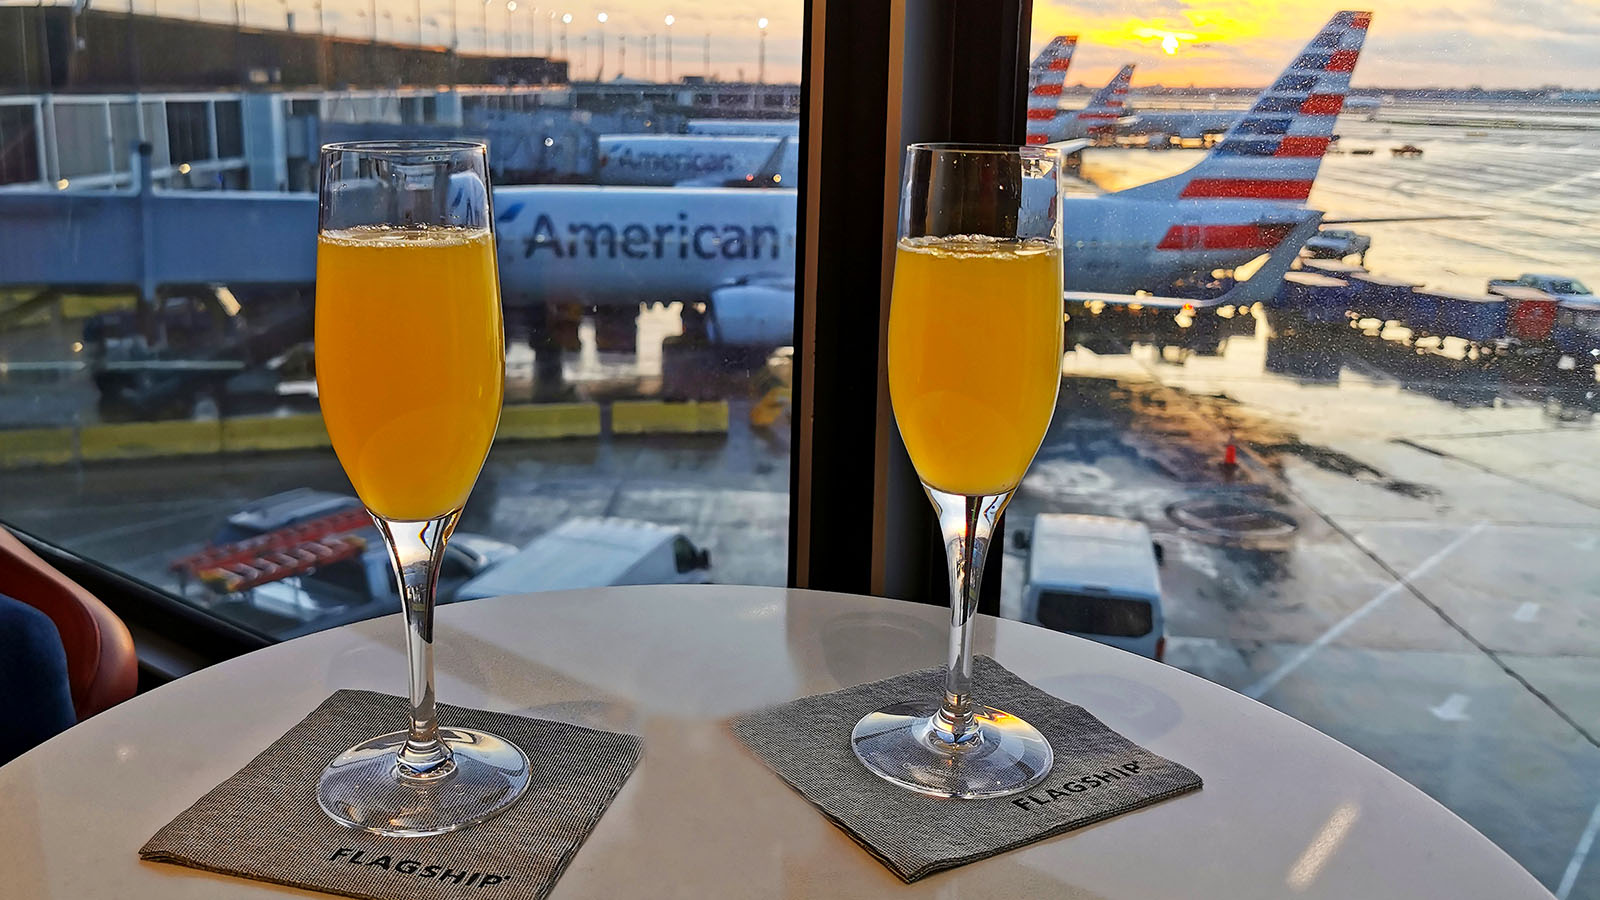 Mimosa at AA's Flagship Lounge in Chicago